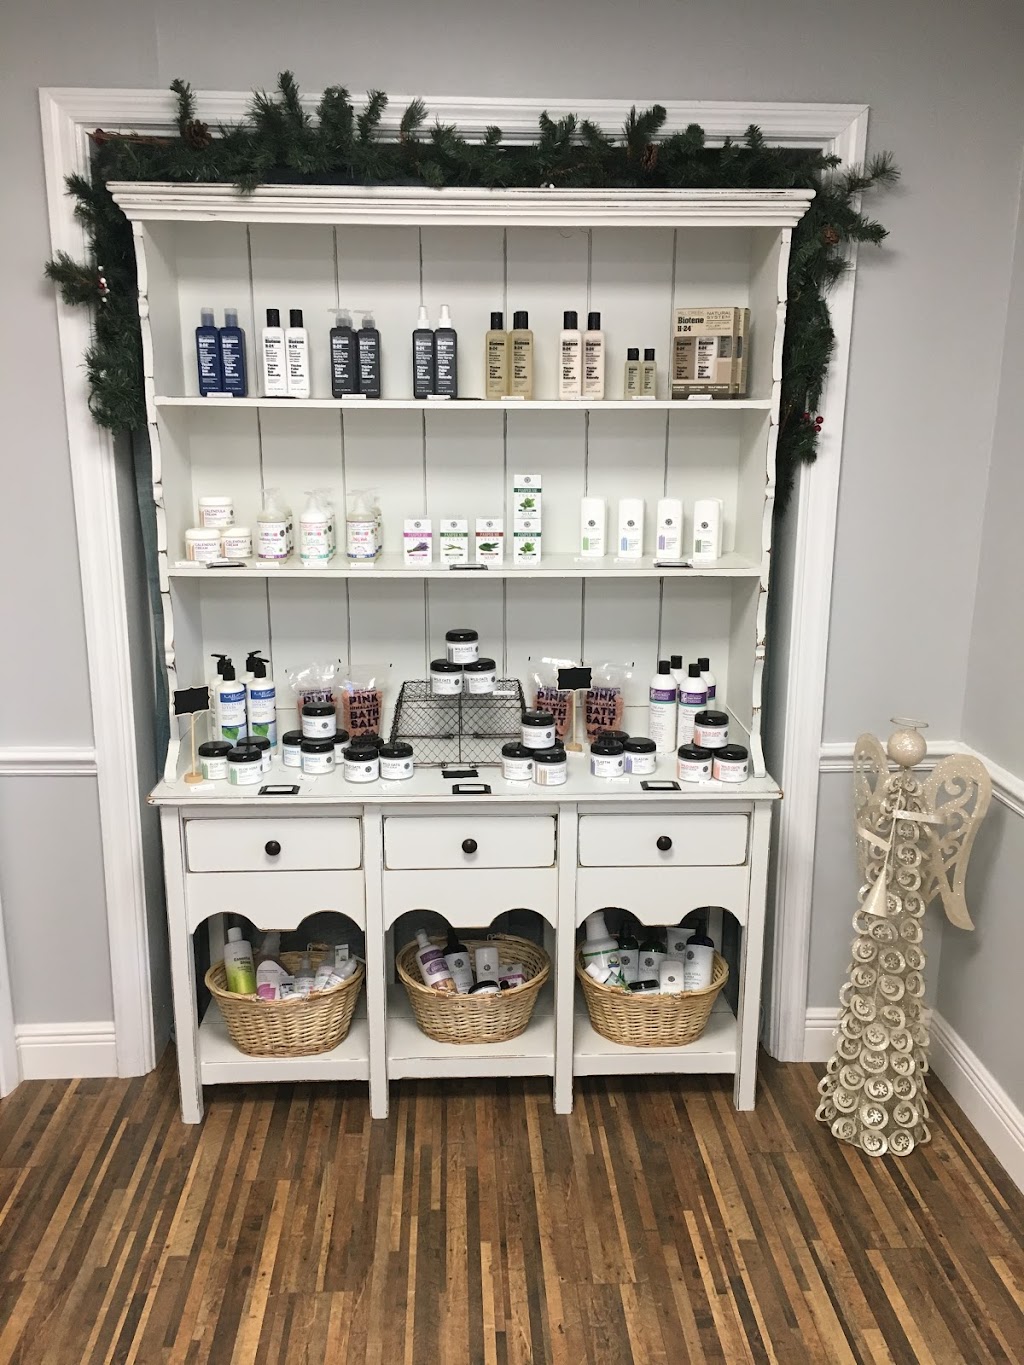 Mister Holistic Apothecary - General Store | Suite 102, 1340 Tuskawilla Rd STE 102, Winter Springs, FL 32708, USA | Phone: (407) 259-2747